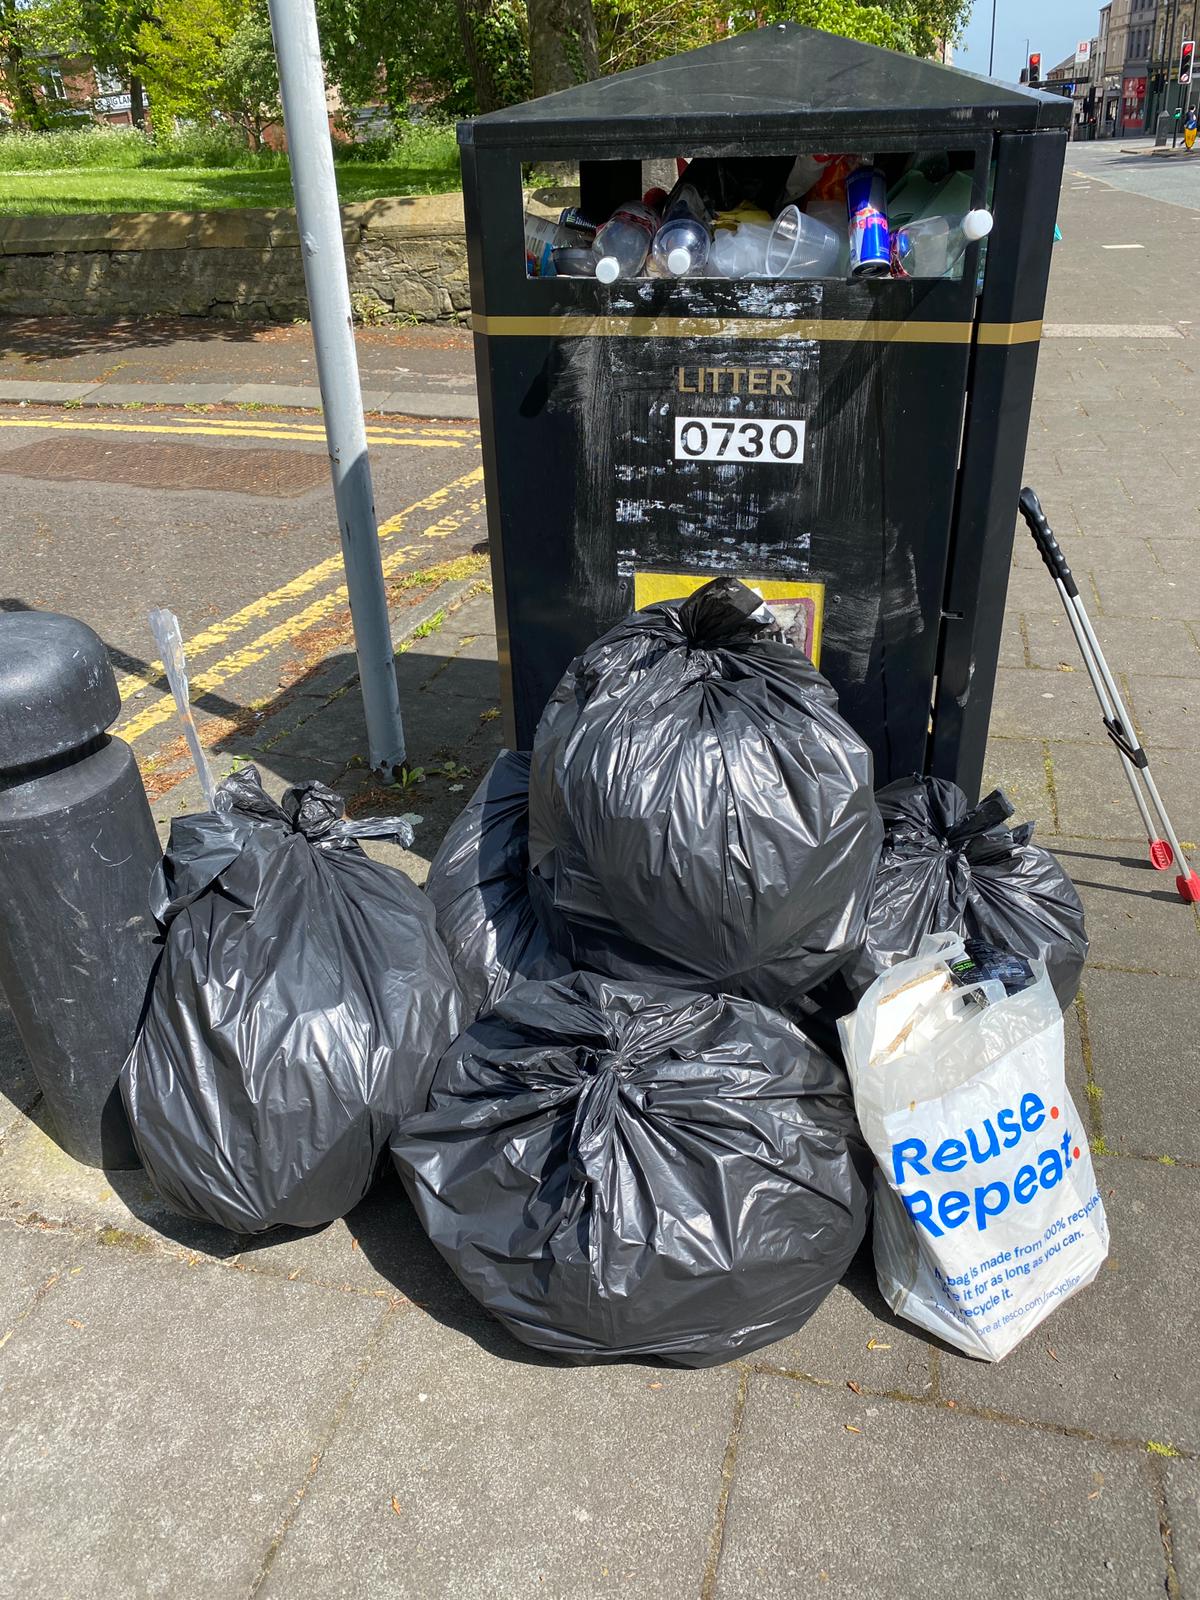 Litter collect by Green Party litterpickers in Arthurs Hill